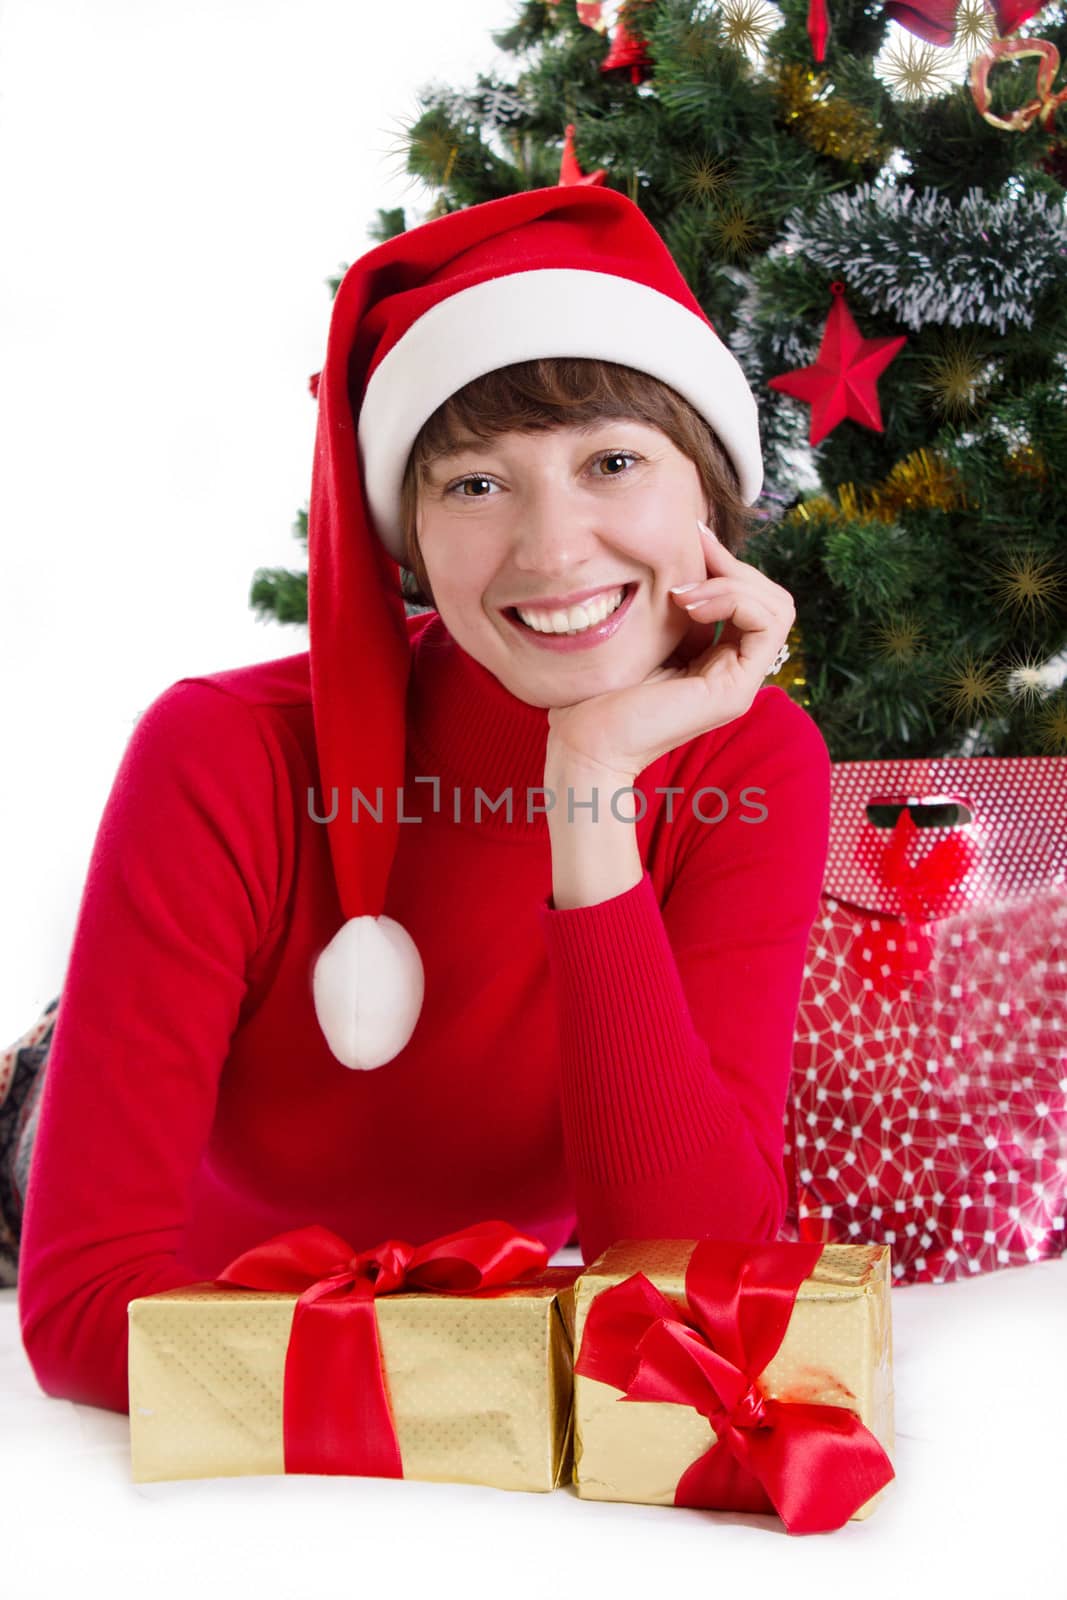 Smiling woman in red Santa hat lying under Christmas tree with gifts